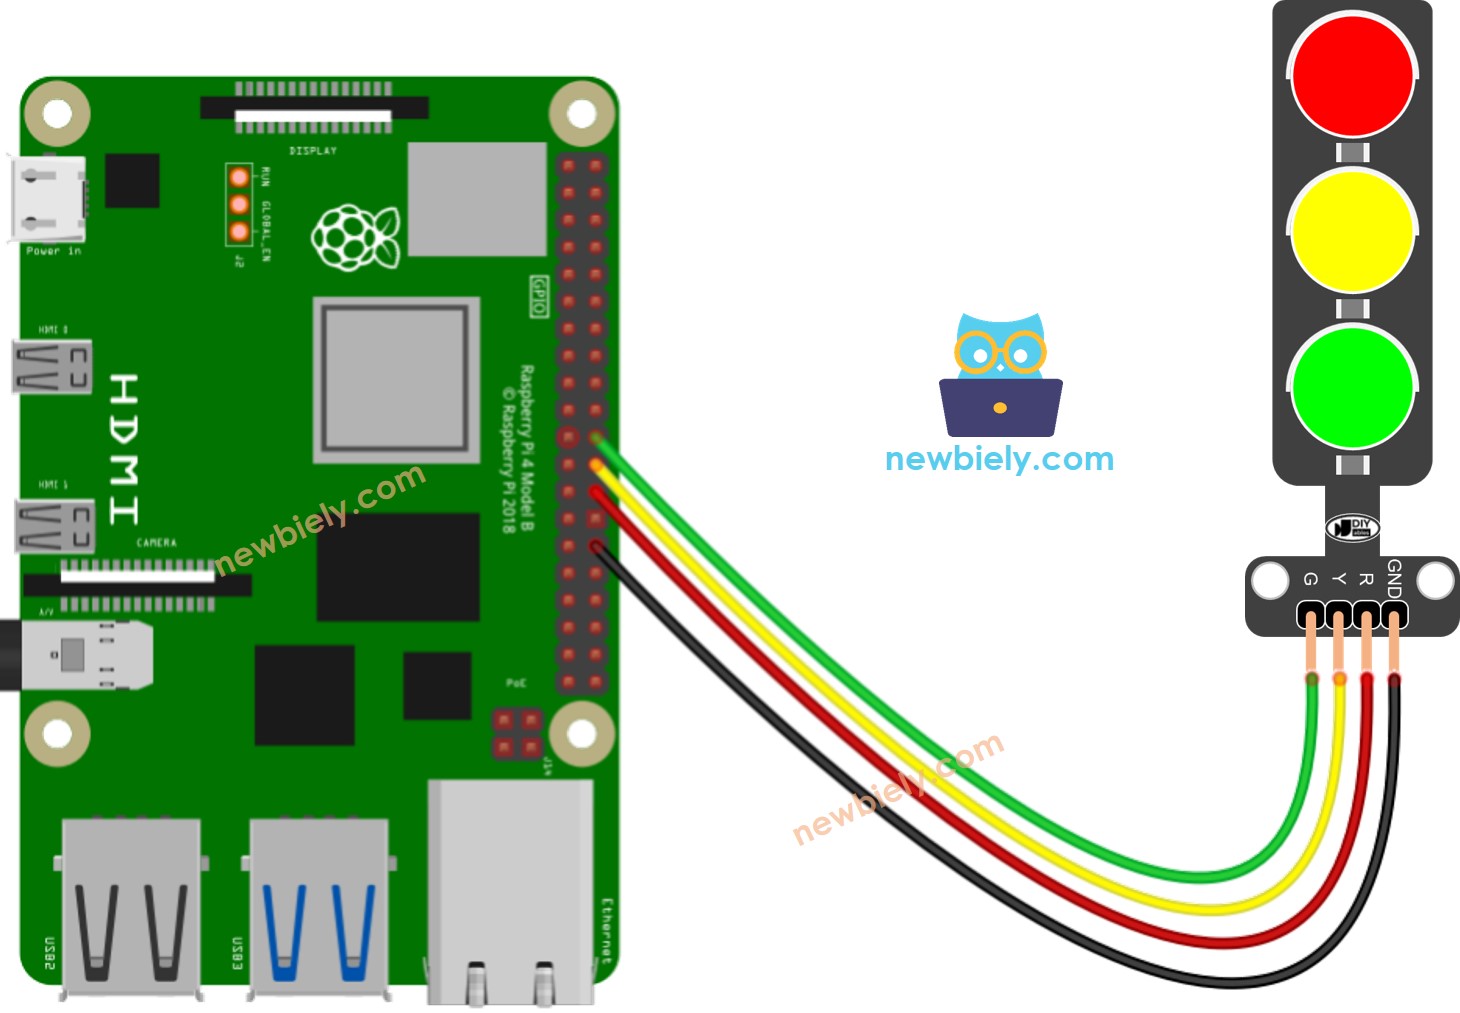 The wiring diagram between Raspberry Pi and traffic light